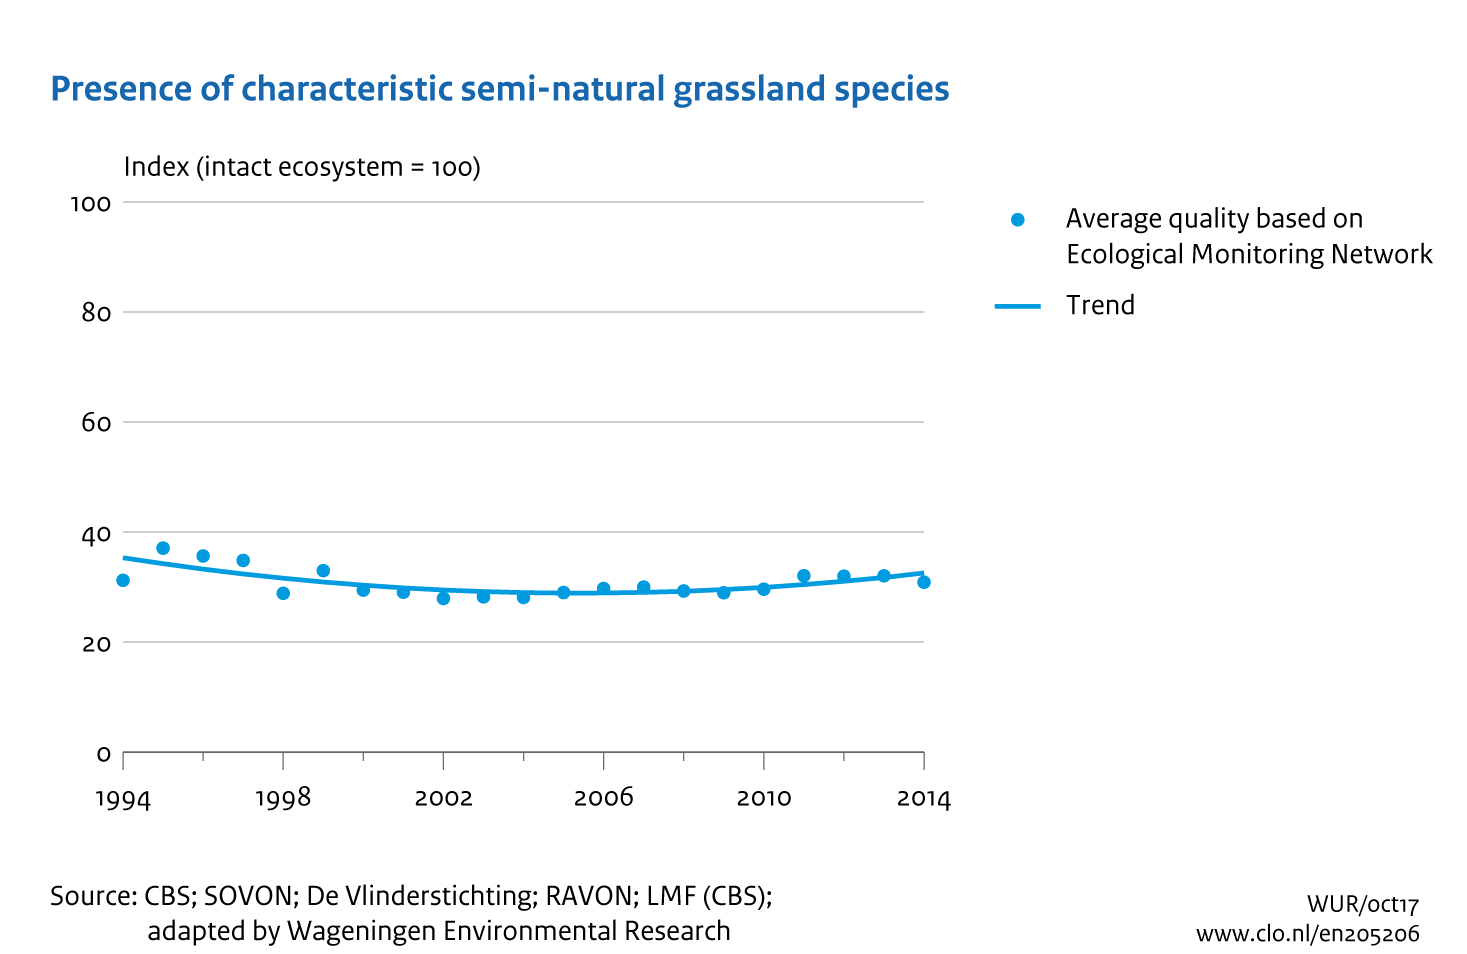 Image  Presence of characteristic semi-natural grassland species. The image is further explained in the text.